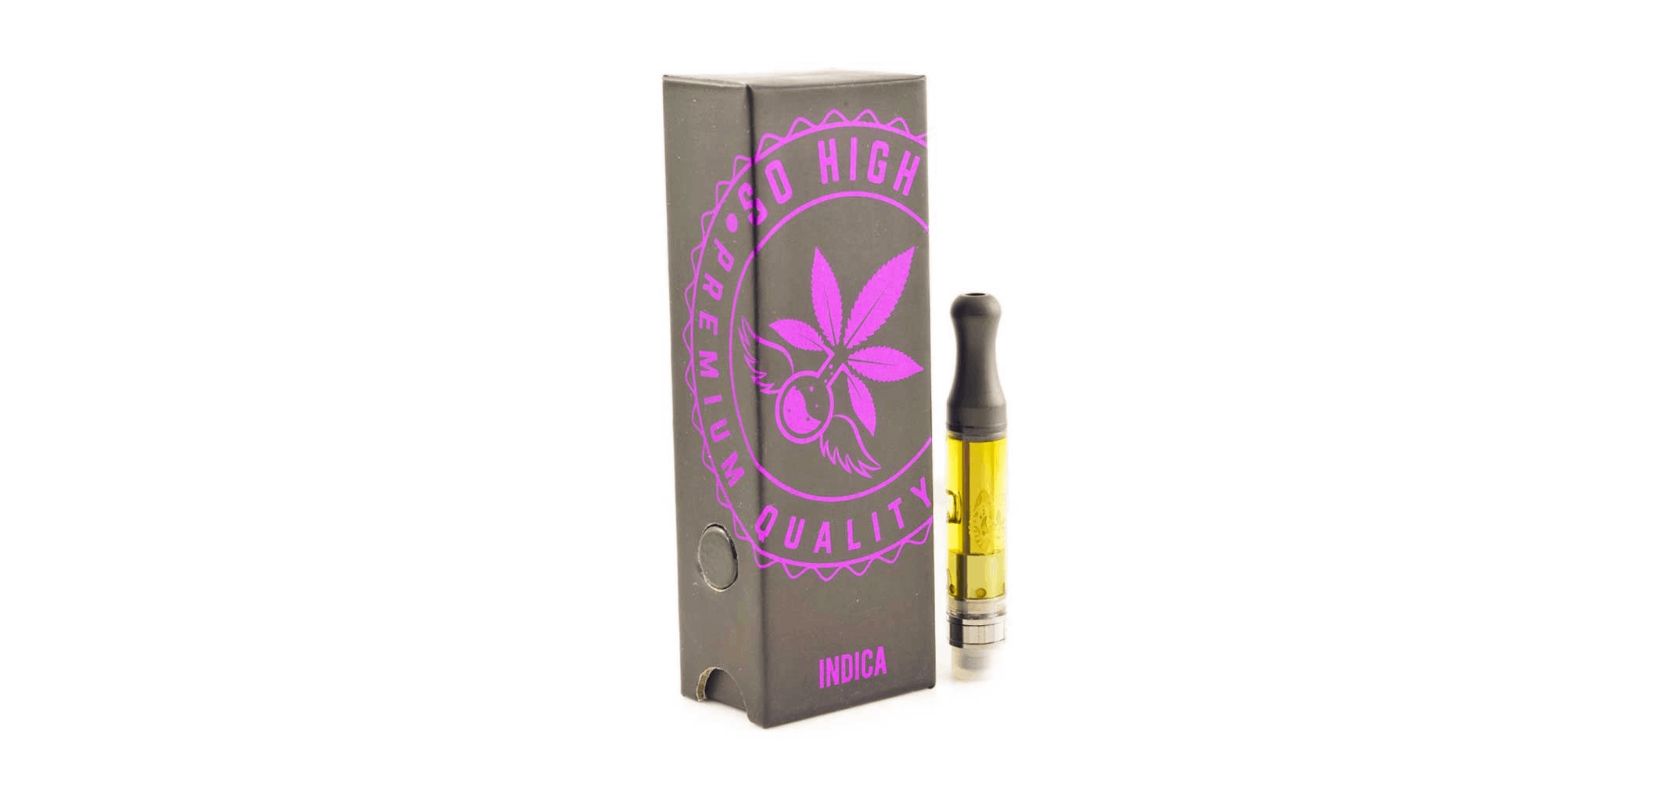 If you're on the lookout for a reliable and effective THC vape pen to help you unwind after a long day, then the So High Extracts Premium Vape 1ML THC in Granddaddy Purple (Indica) is definitely worth a go.